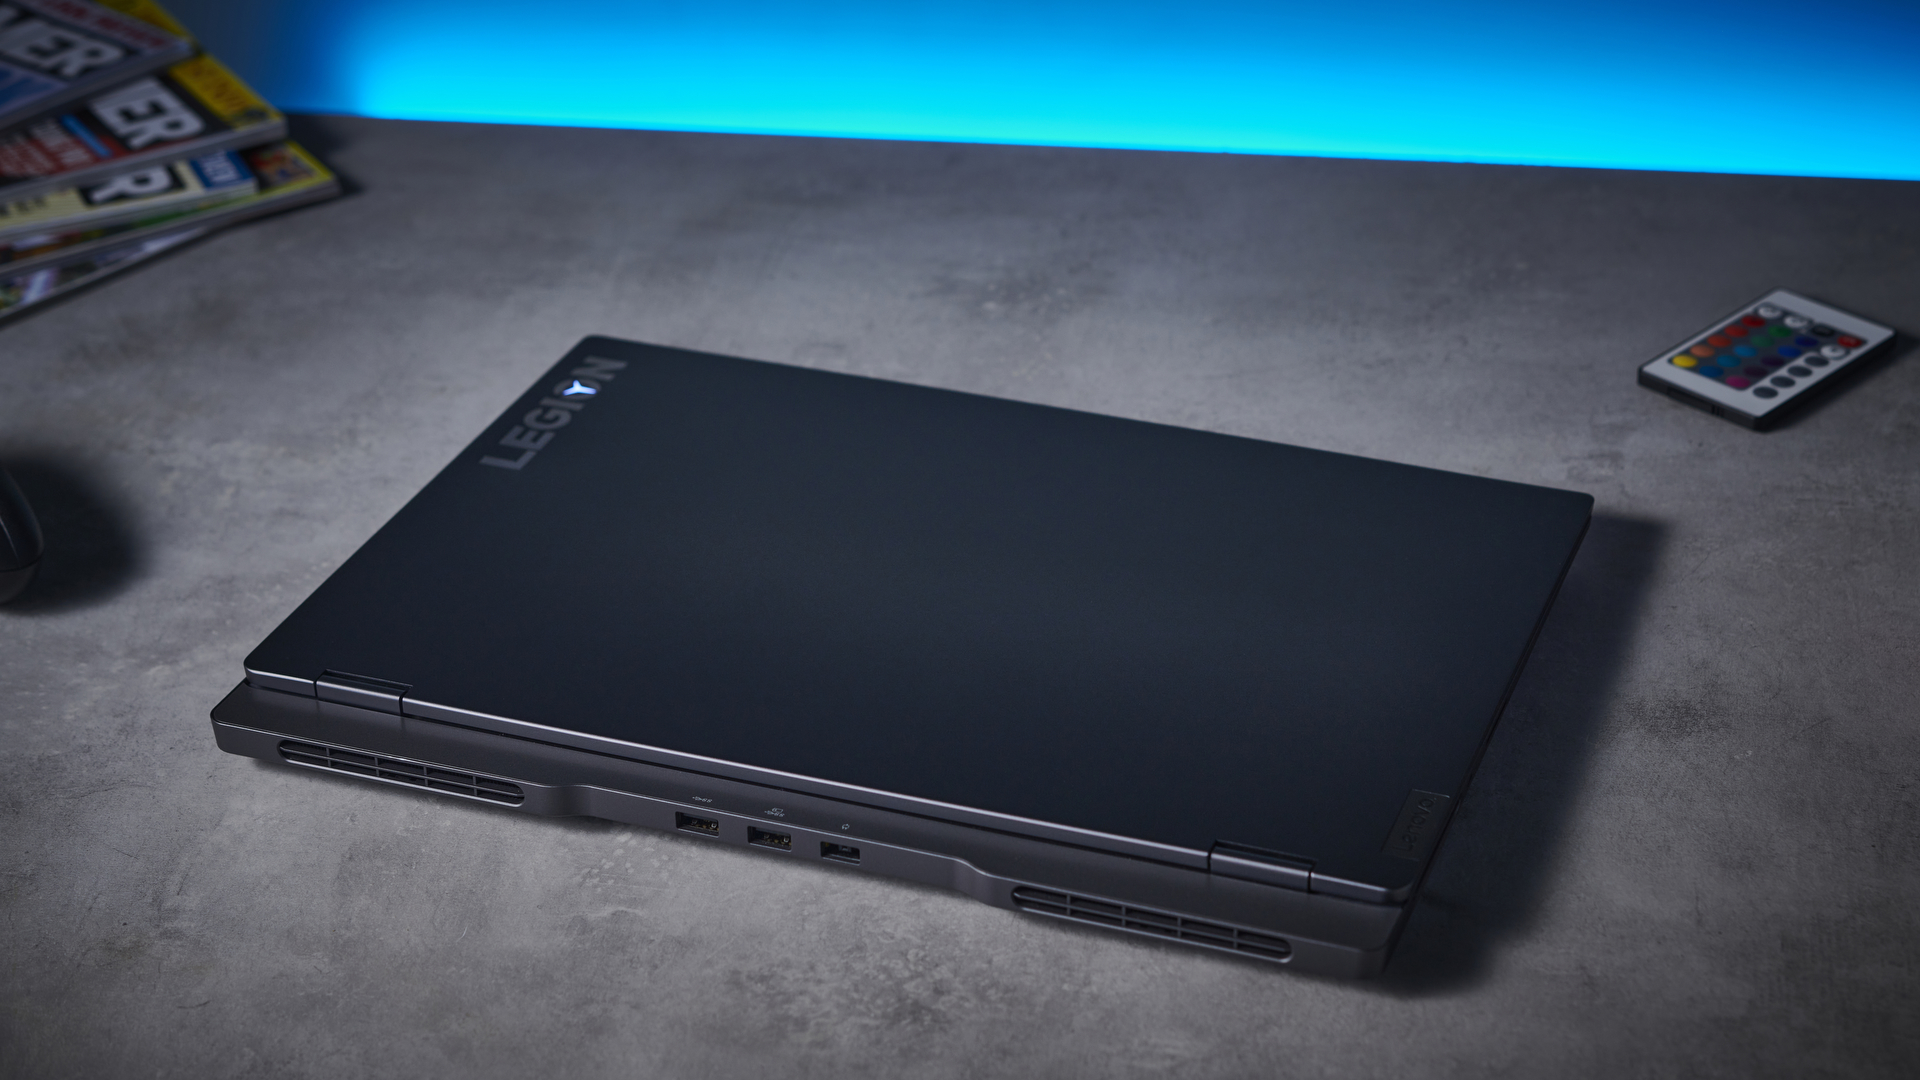 Image of the Lenovo Legion S7 laptop with the lid closed.